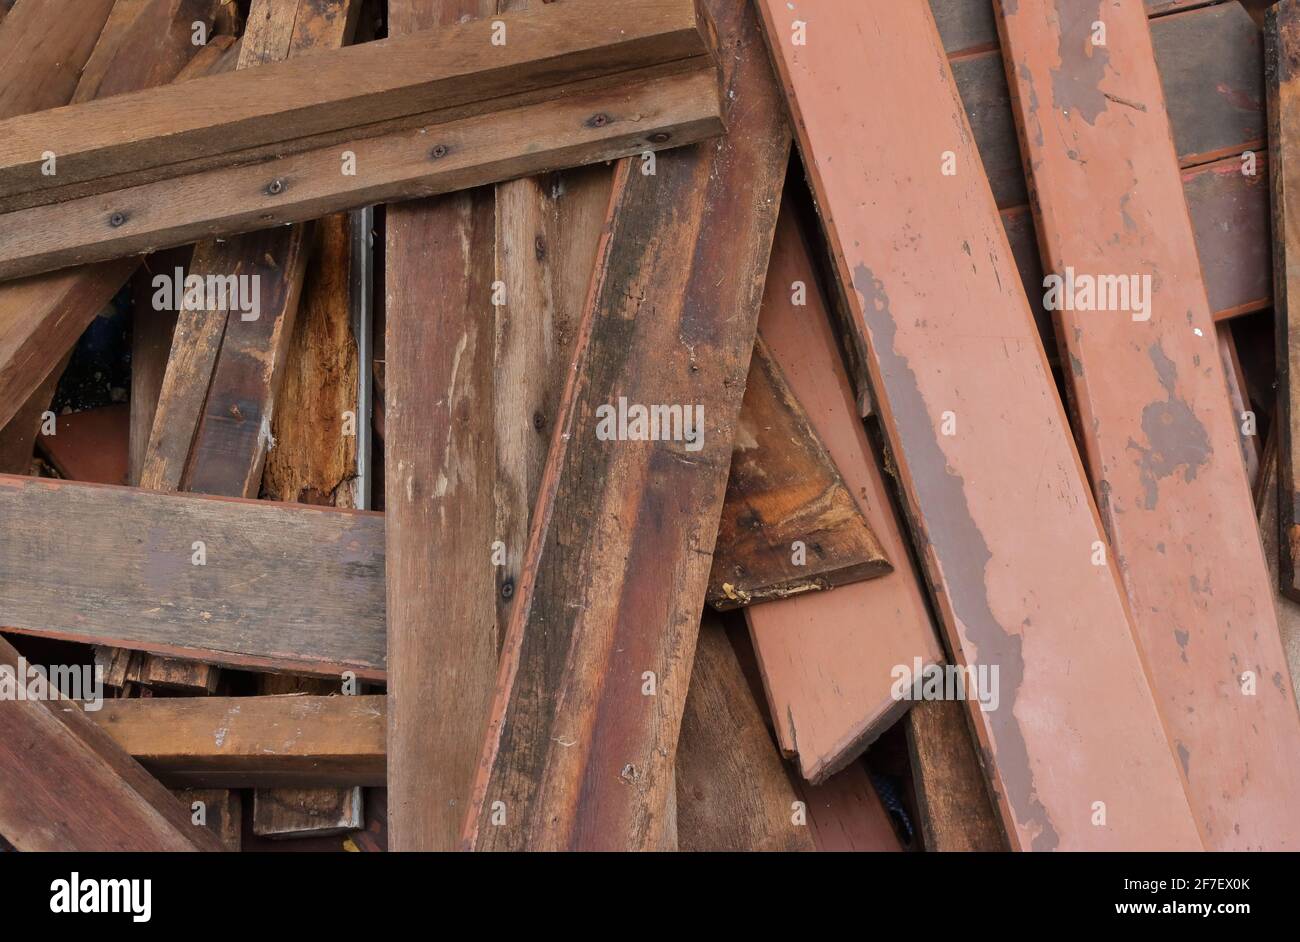 Closeup pile of damaged plank wood dumped on the floor during repairing work, high angle view Stock Photo